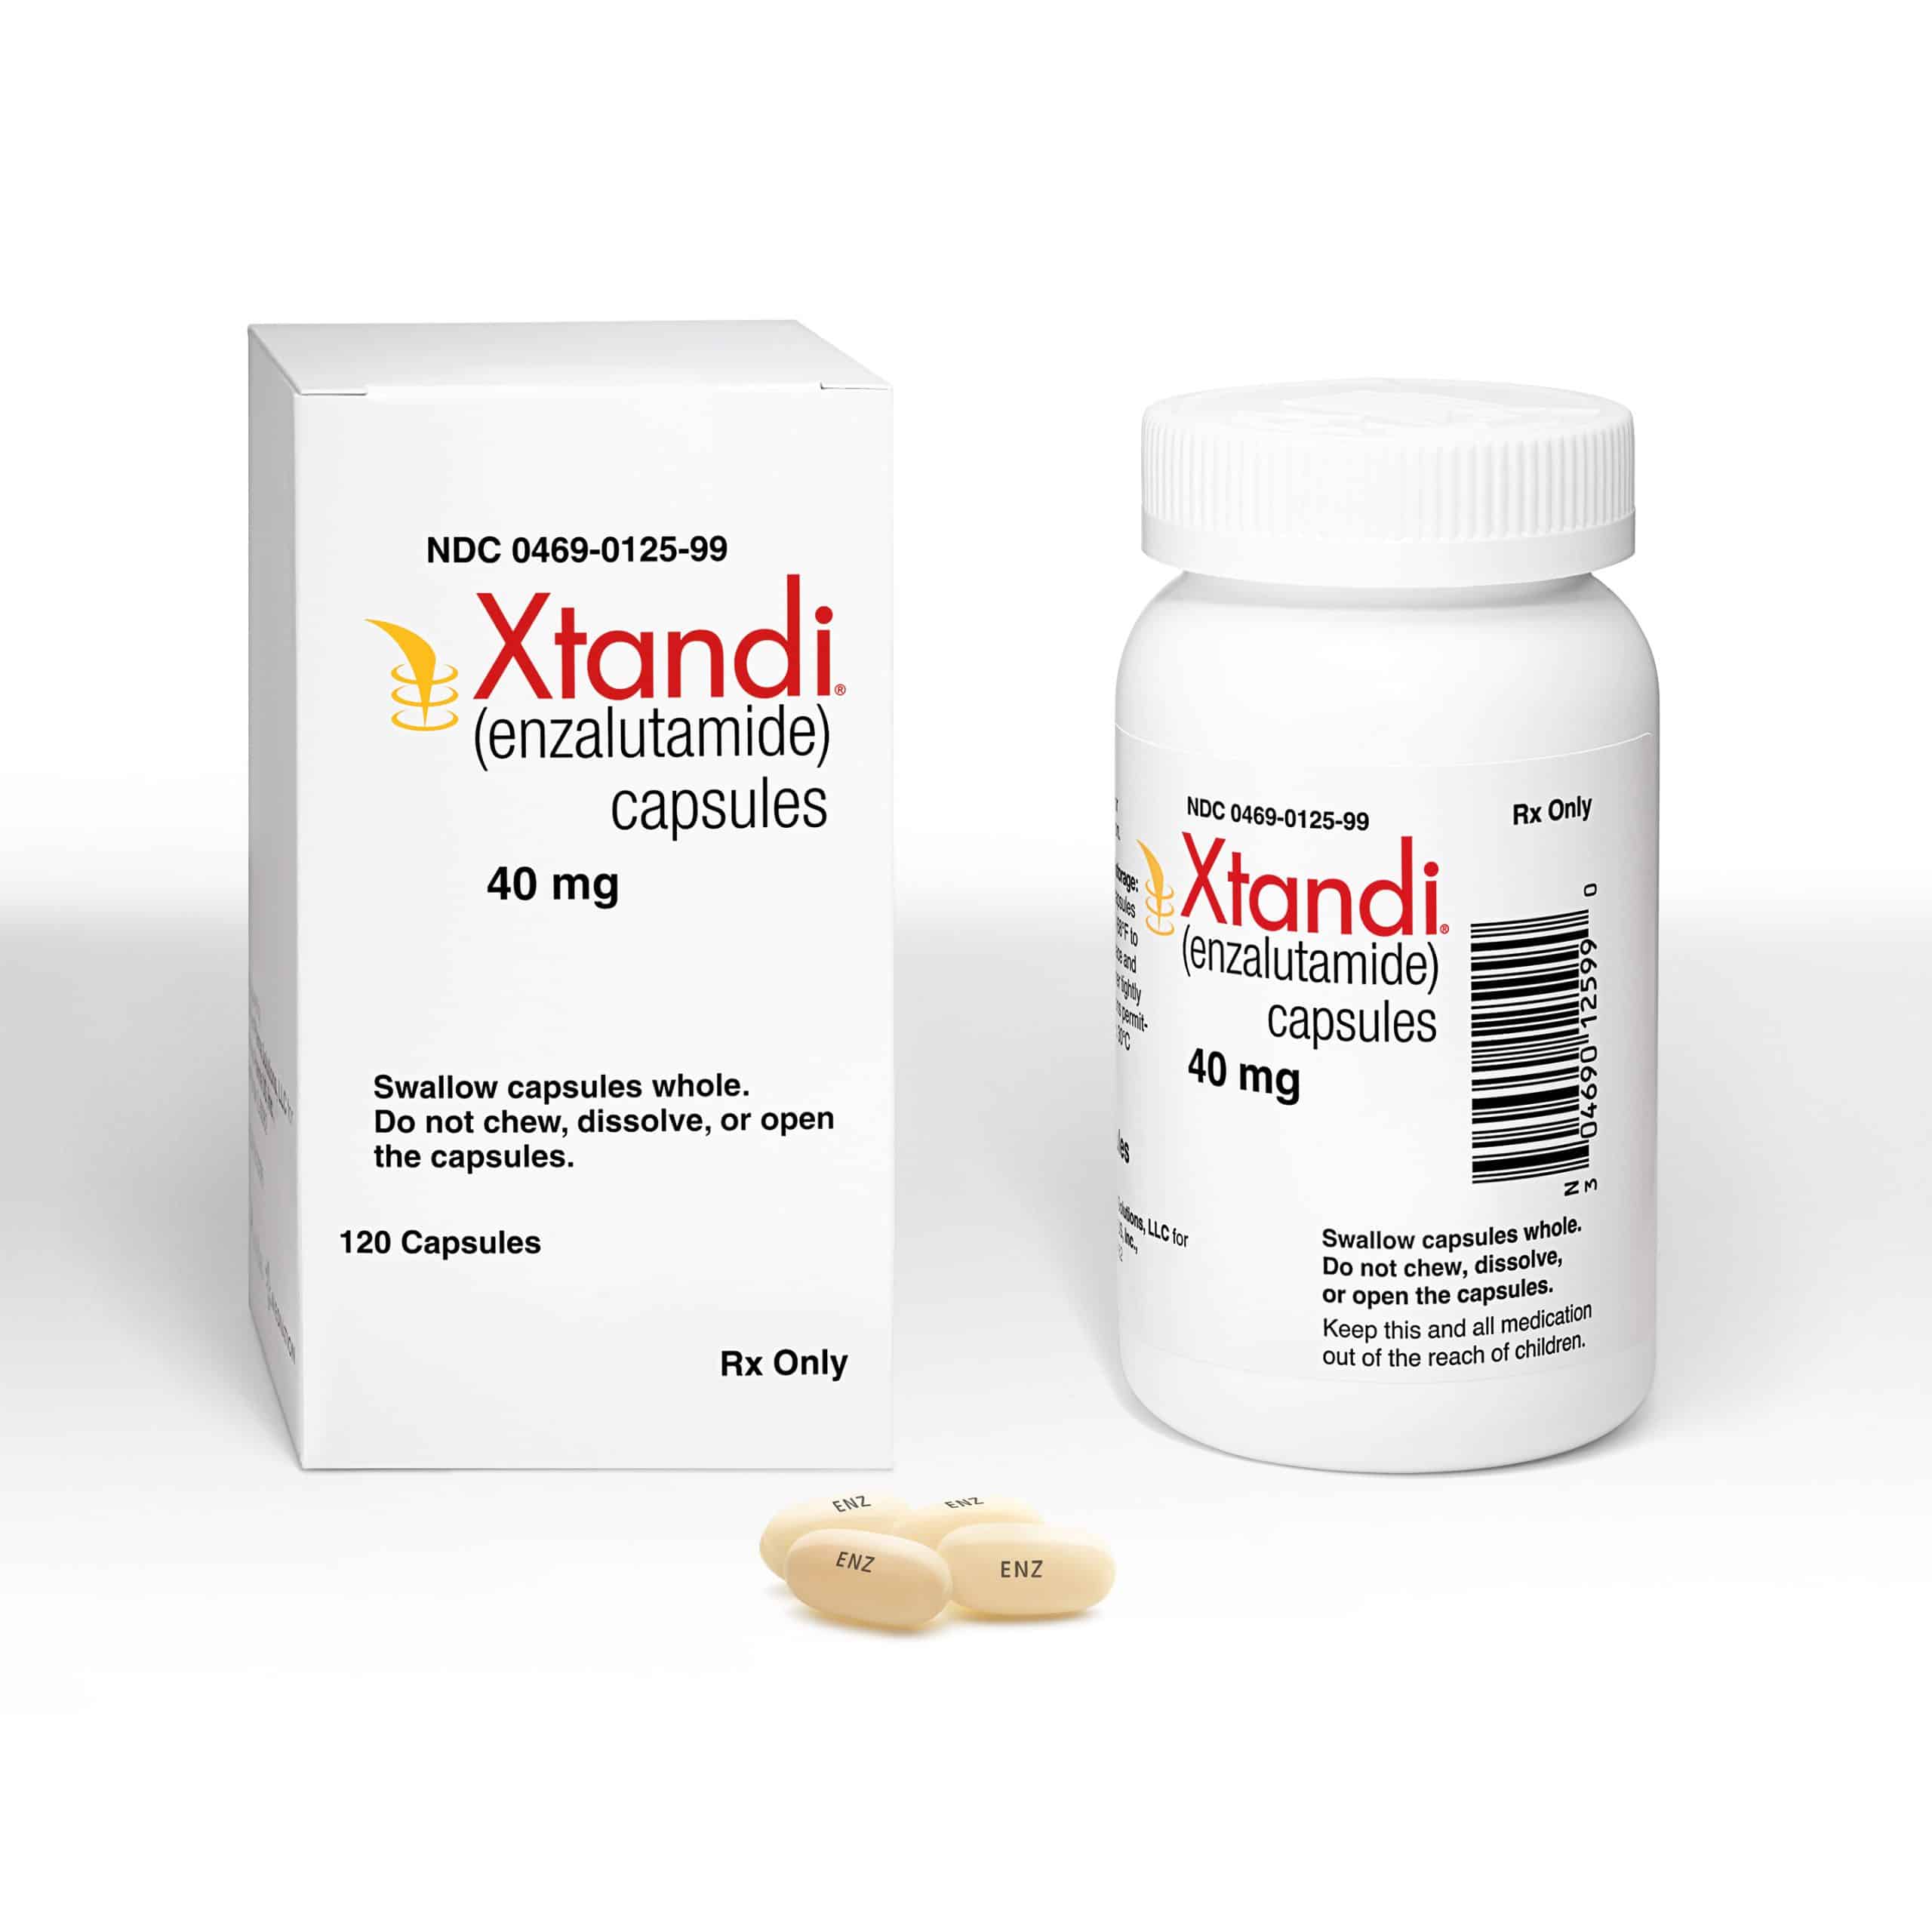 Xtandi approved as first line prostate cancer treatment